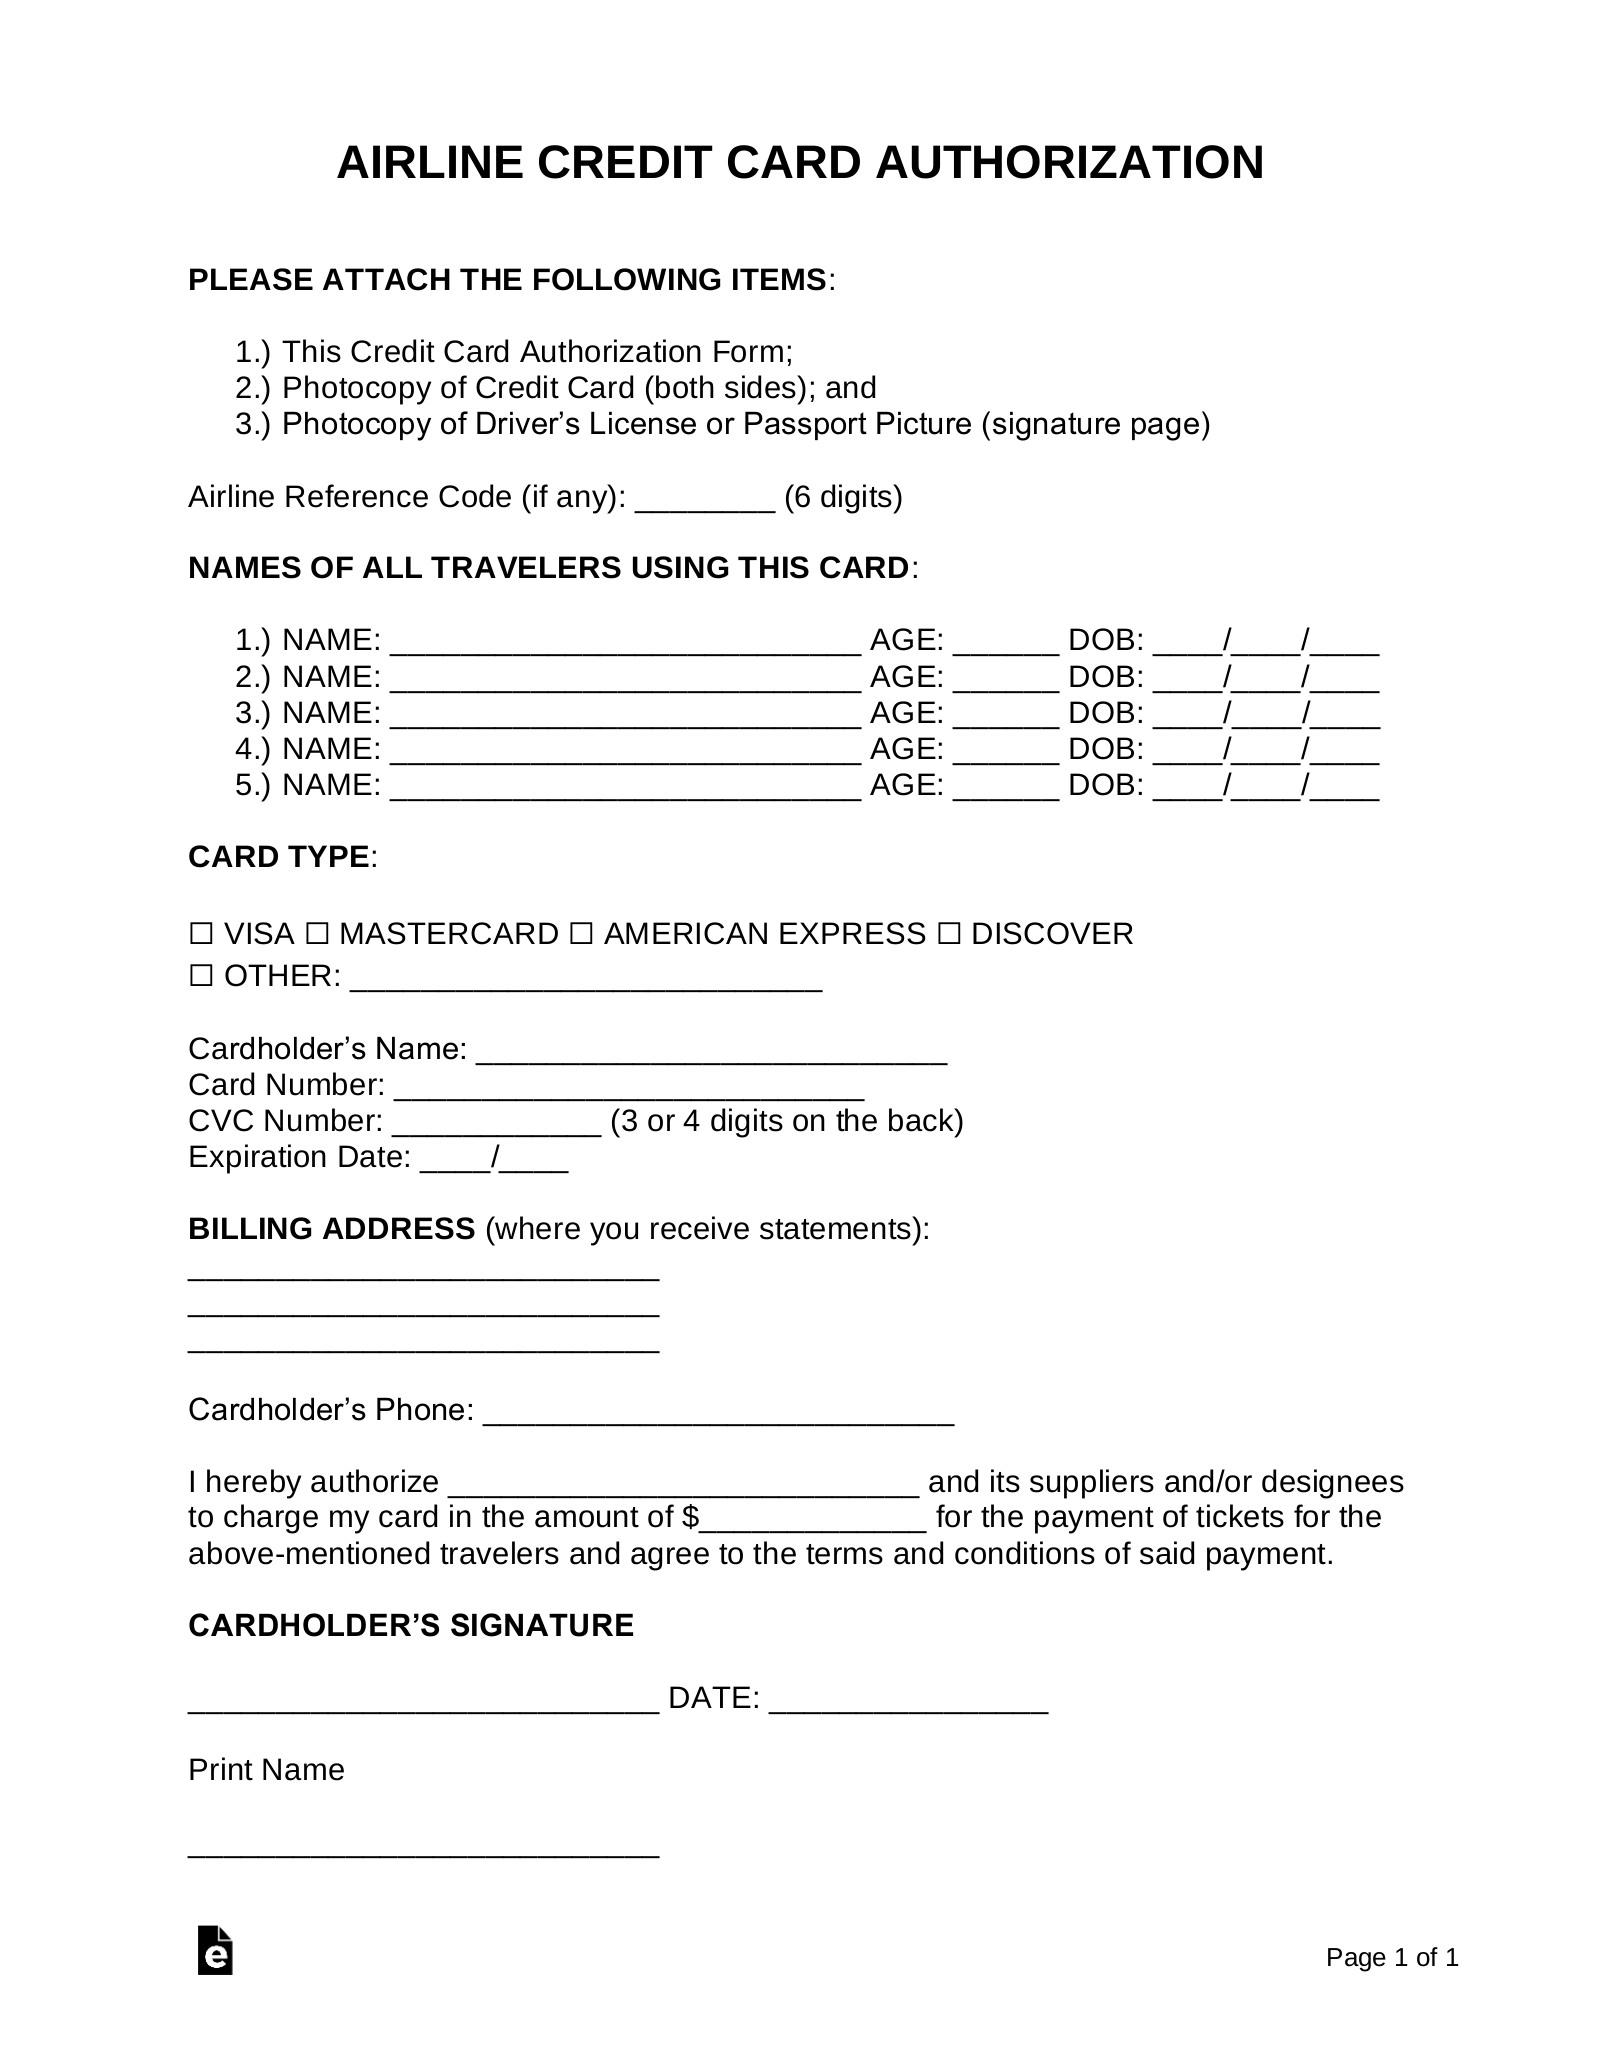 Airline Credit Card Authorization Form